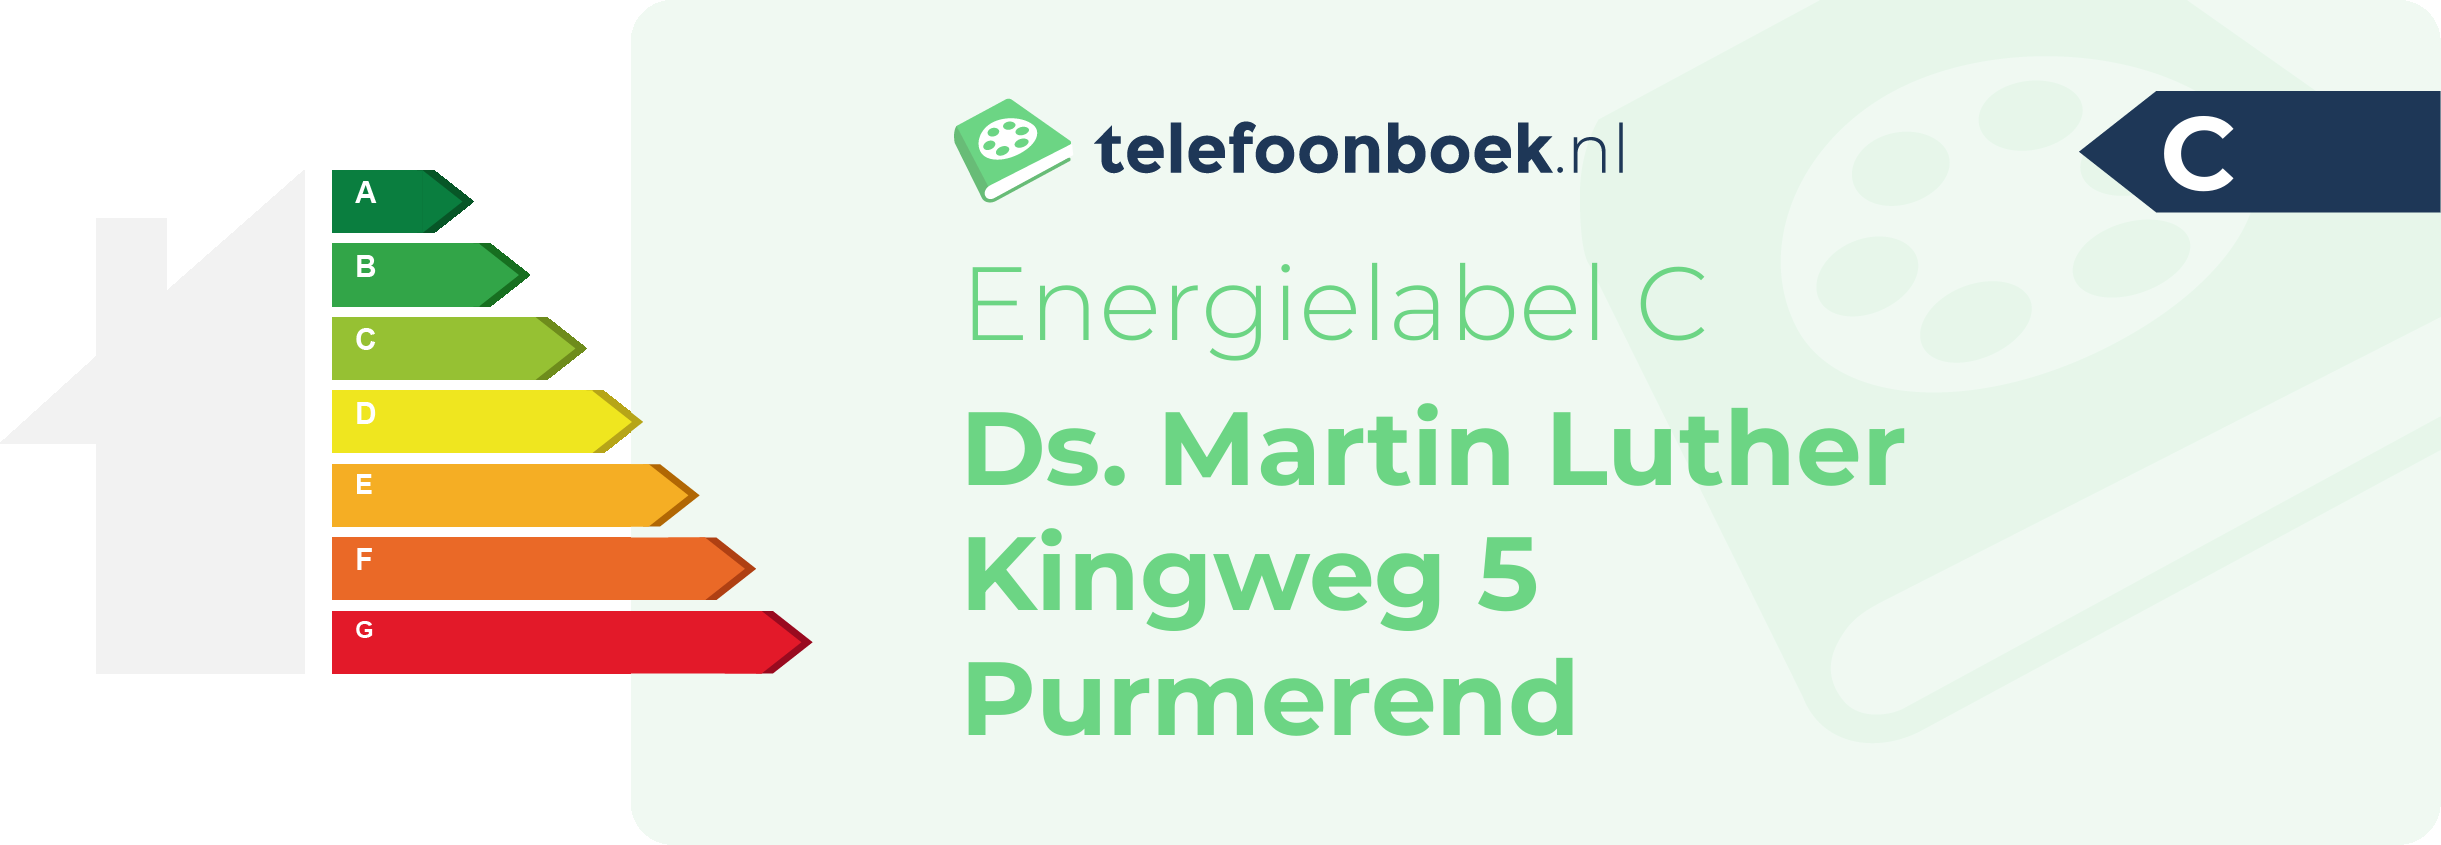 Energielabel Ds. Martin Luther Kingweg 5 Purmerend